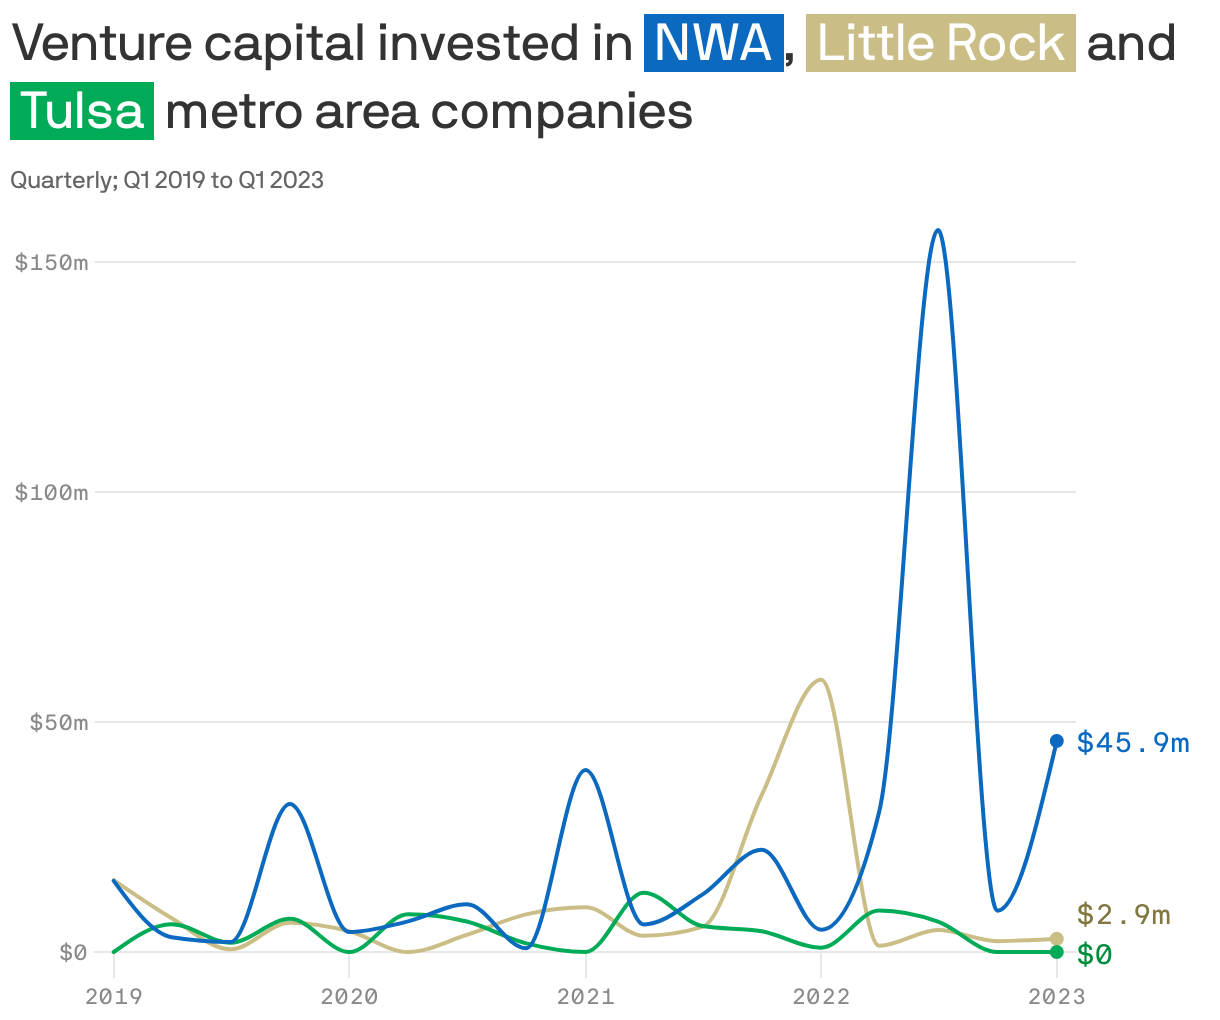 Venture capital invested in <span style="background:#0b6abf;padding:2px 5px 1px;color:white;">NWA</span>, <span style="background:#cabd86;padding:2px 5px 1px;color:white;">Little Rock</span> and  <span style="background:#00ab58;padding:2px 5px 1px;color:white;">Tulsa</span>  metro area companies